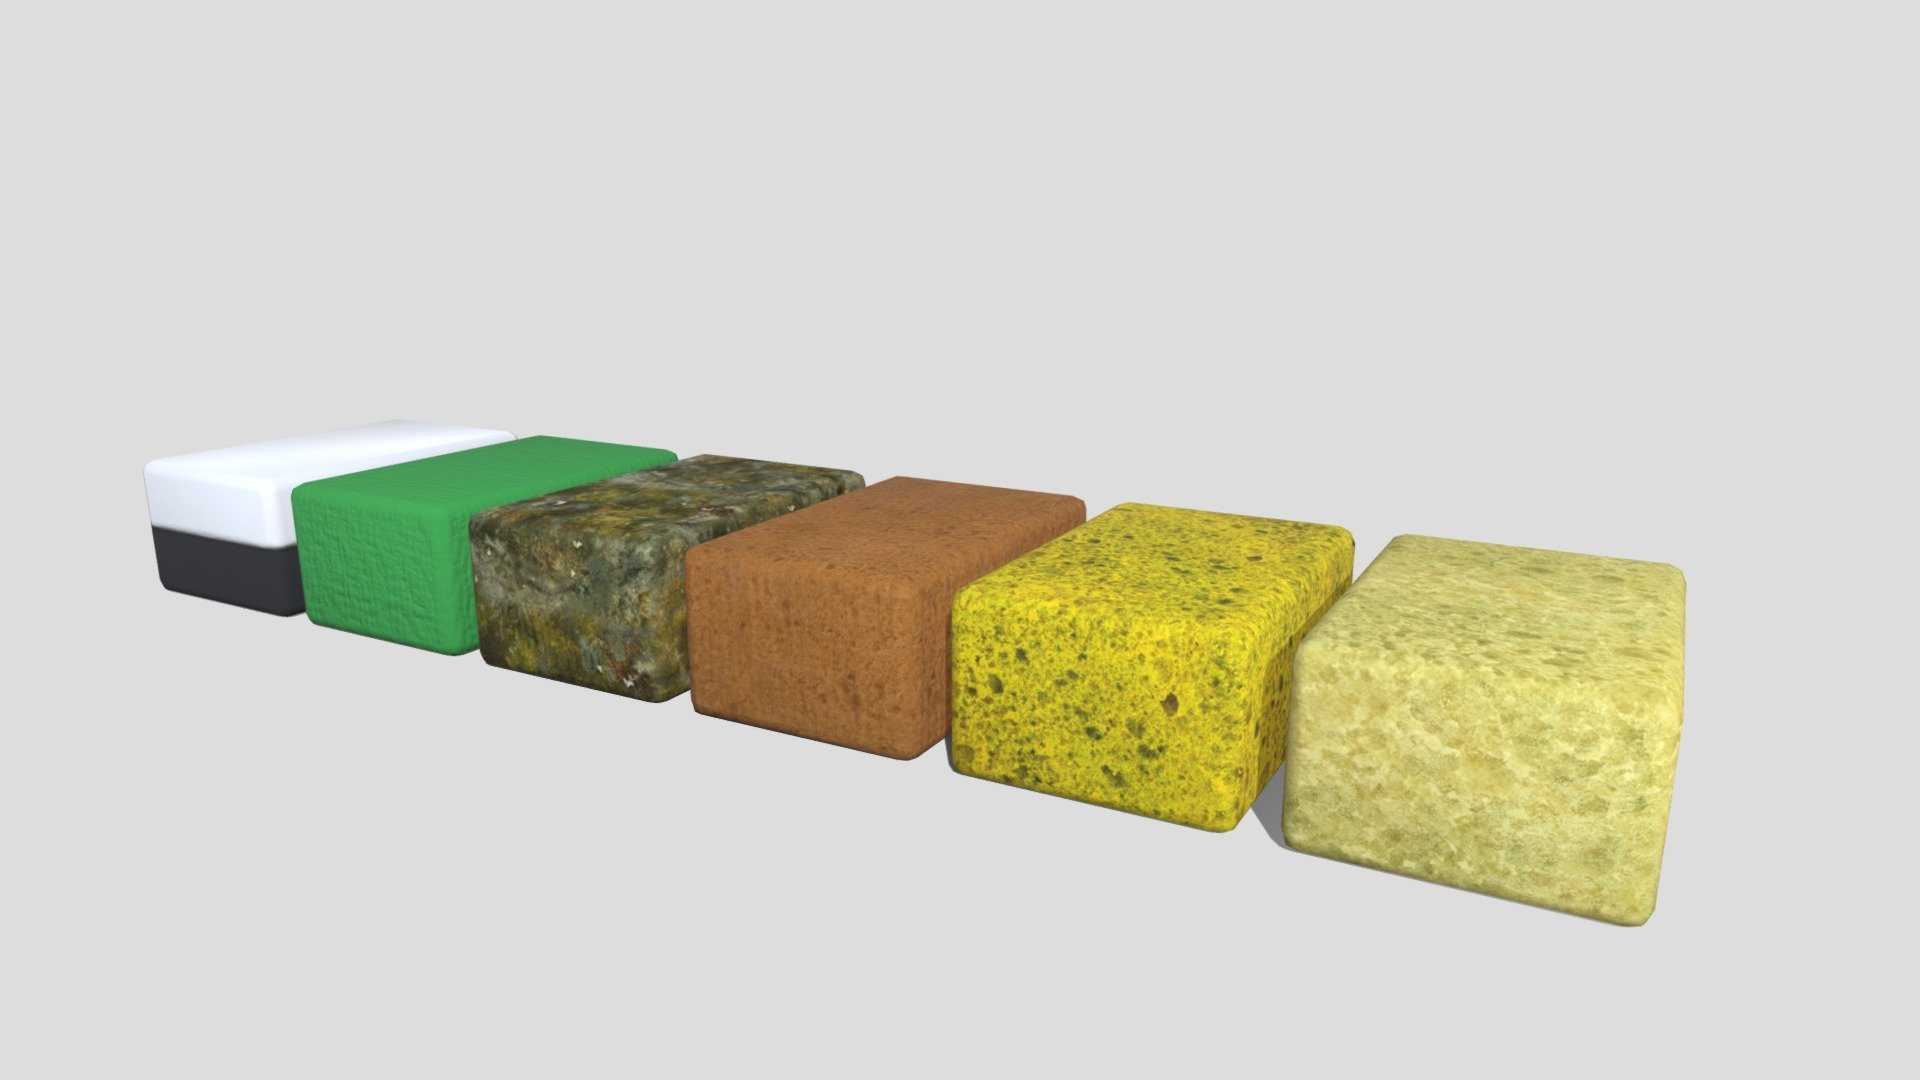 Pack of 5 chalk board sponges and 1 white board sponge.

One sponge is moldy and usable in a horror setting or as an old prop.

Contains models and textures 3d model